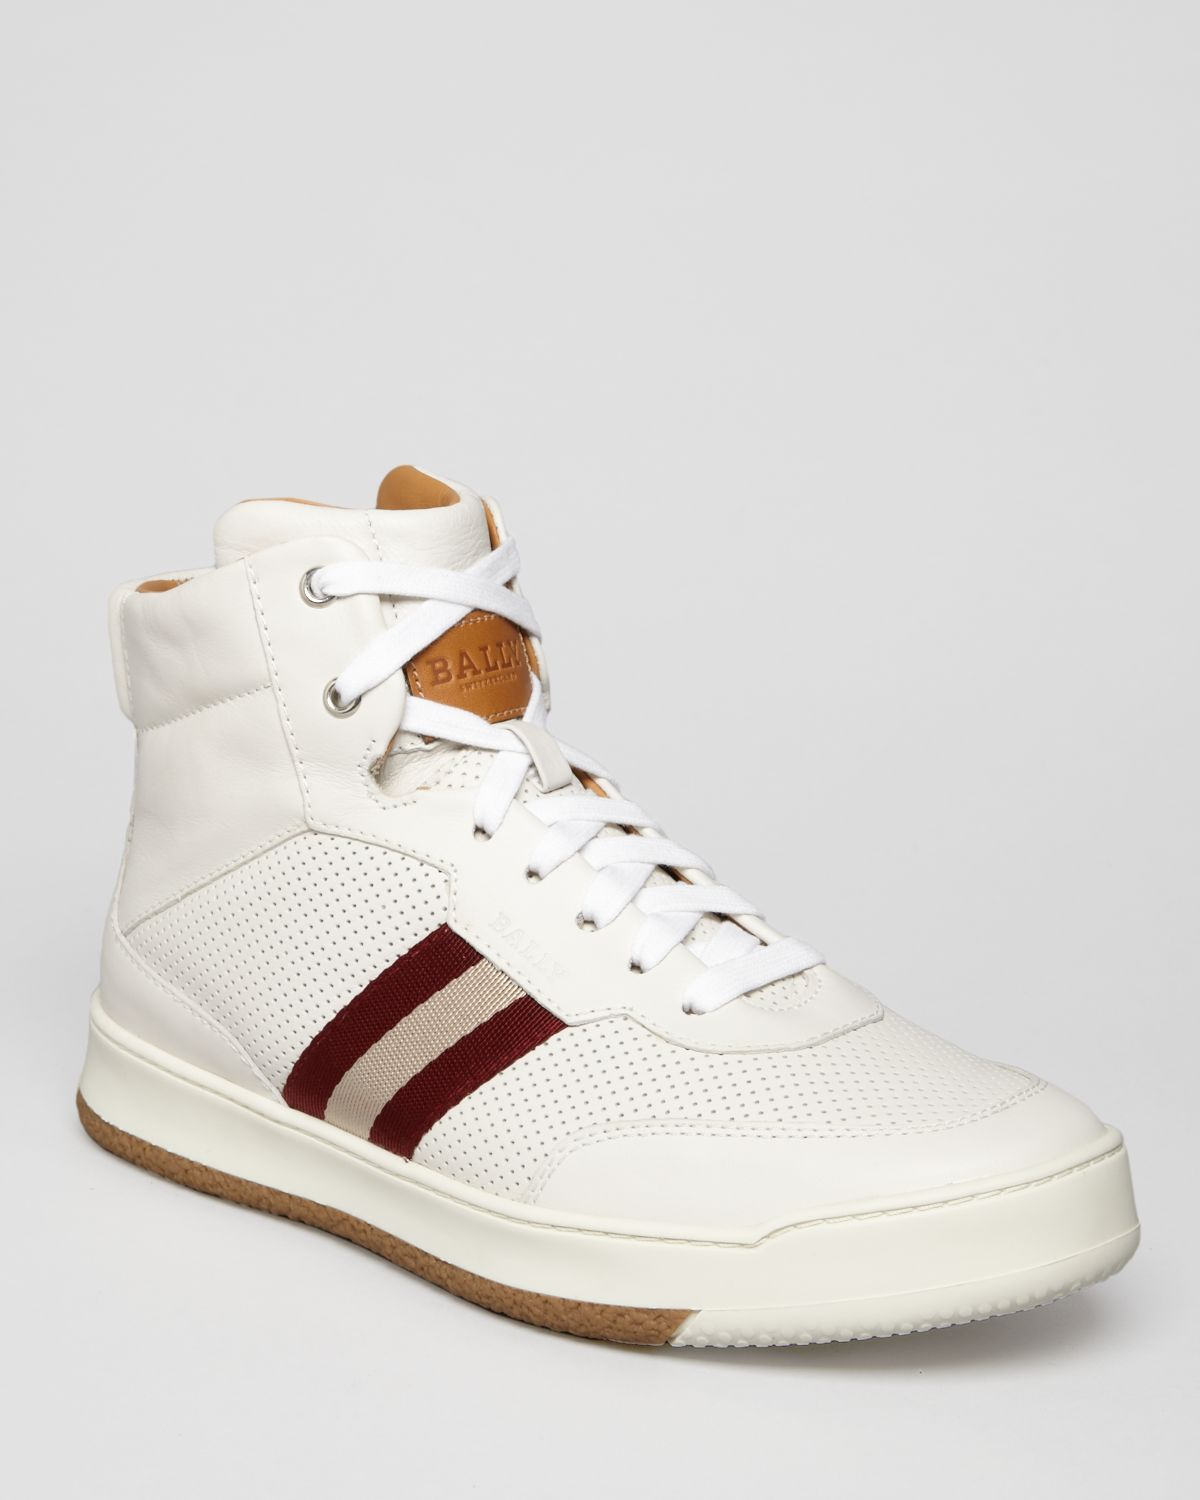 bally high top sneakers,Quality assurance,protein-burger.com